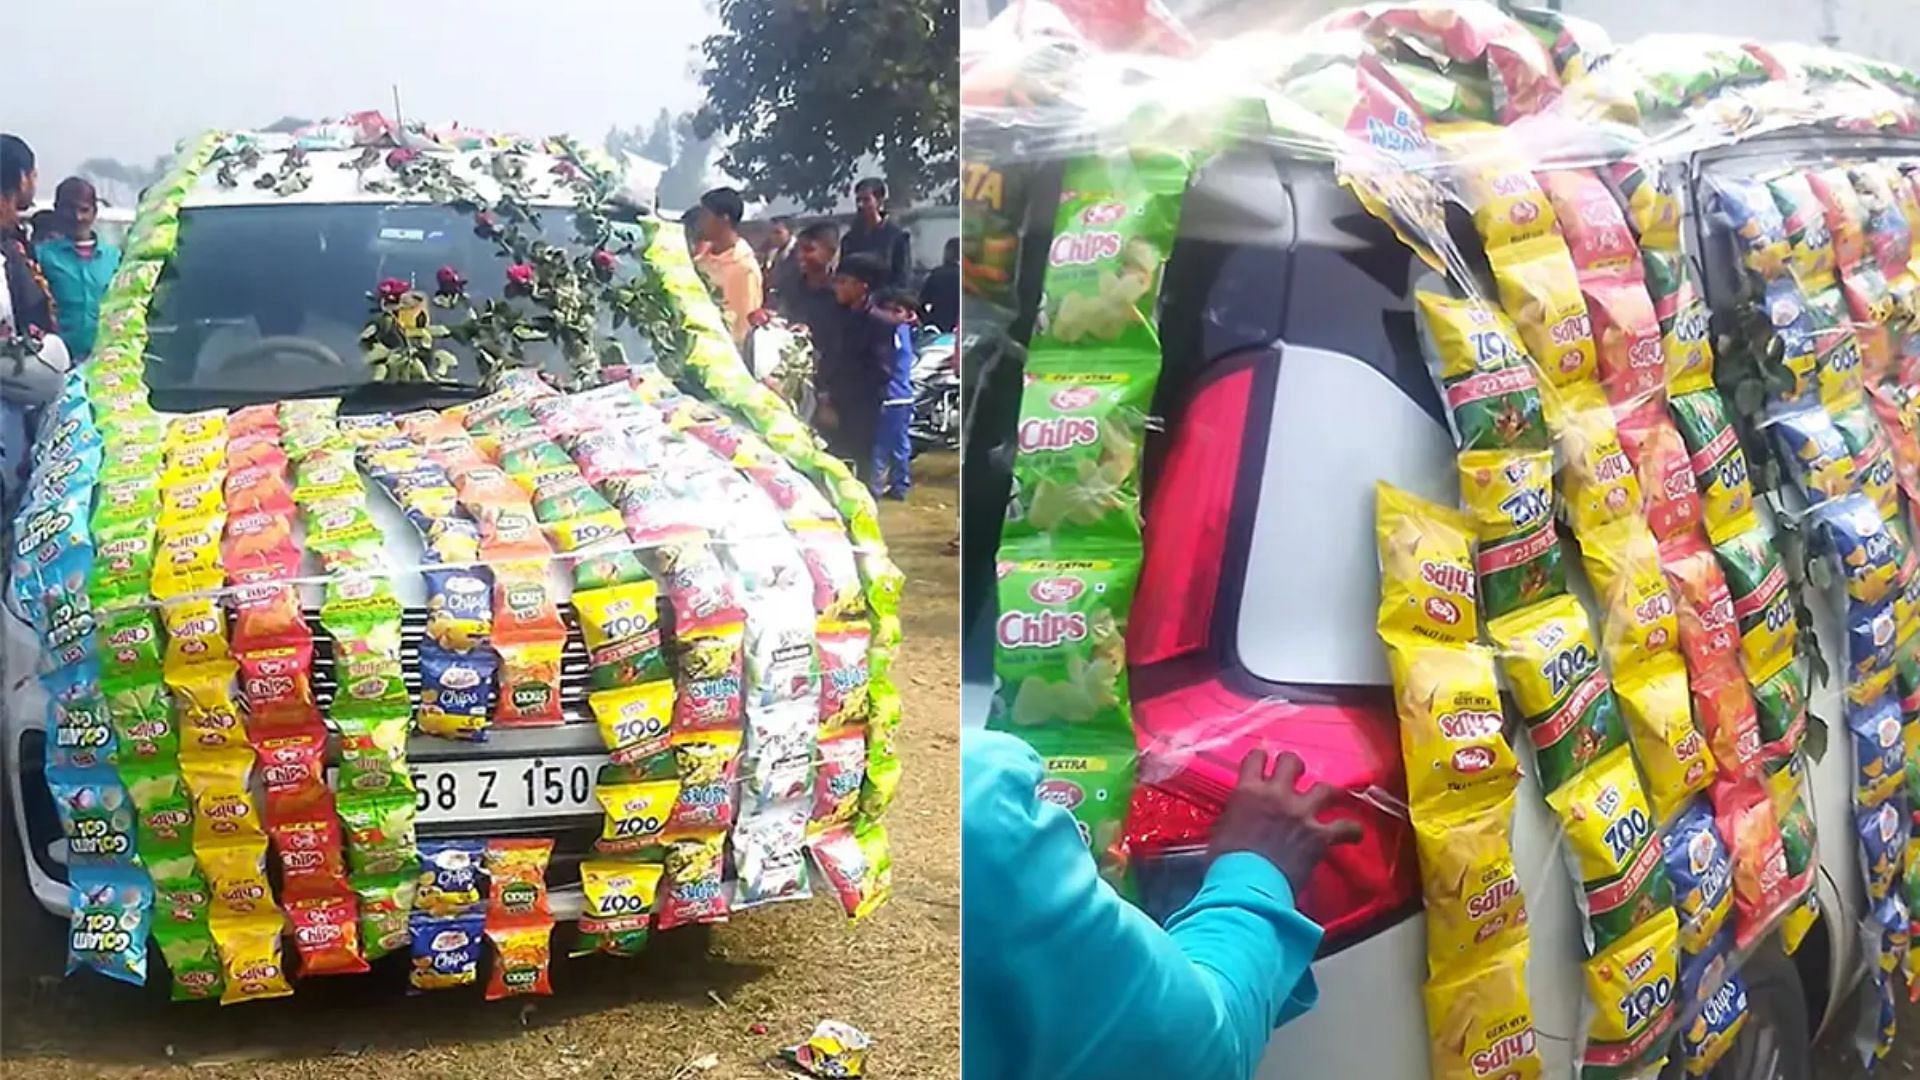 Groom Car Decorated With Chips Packets not flowers video goes viral on social media